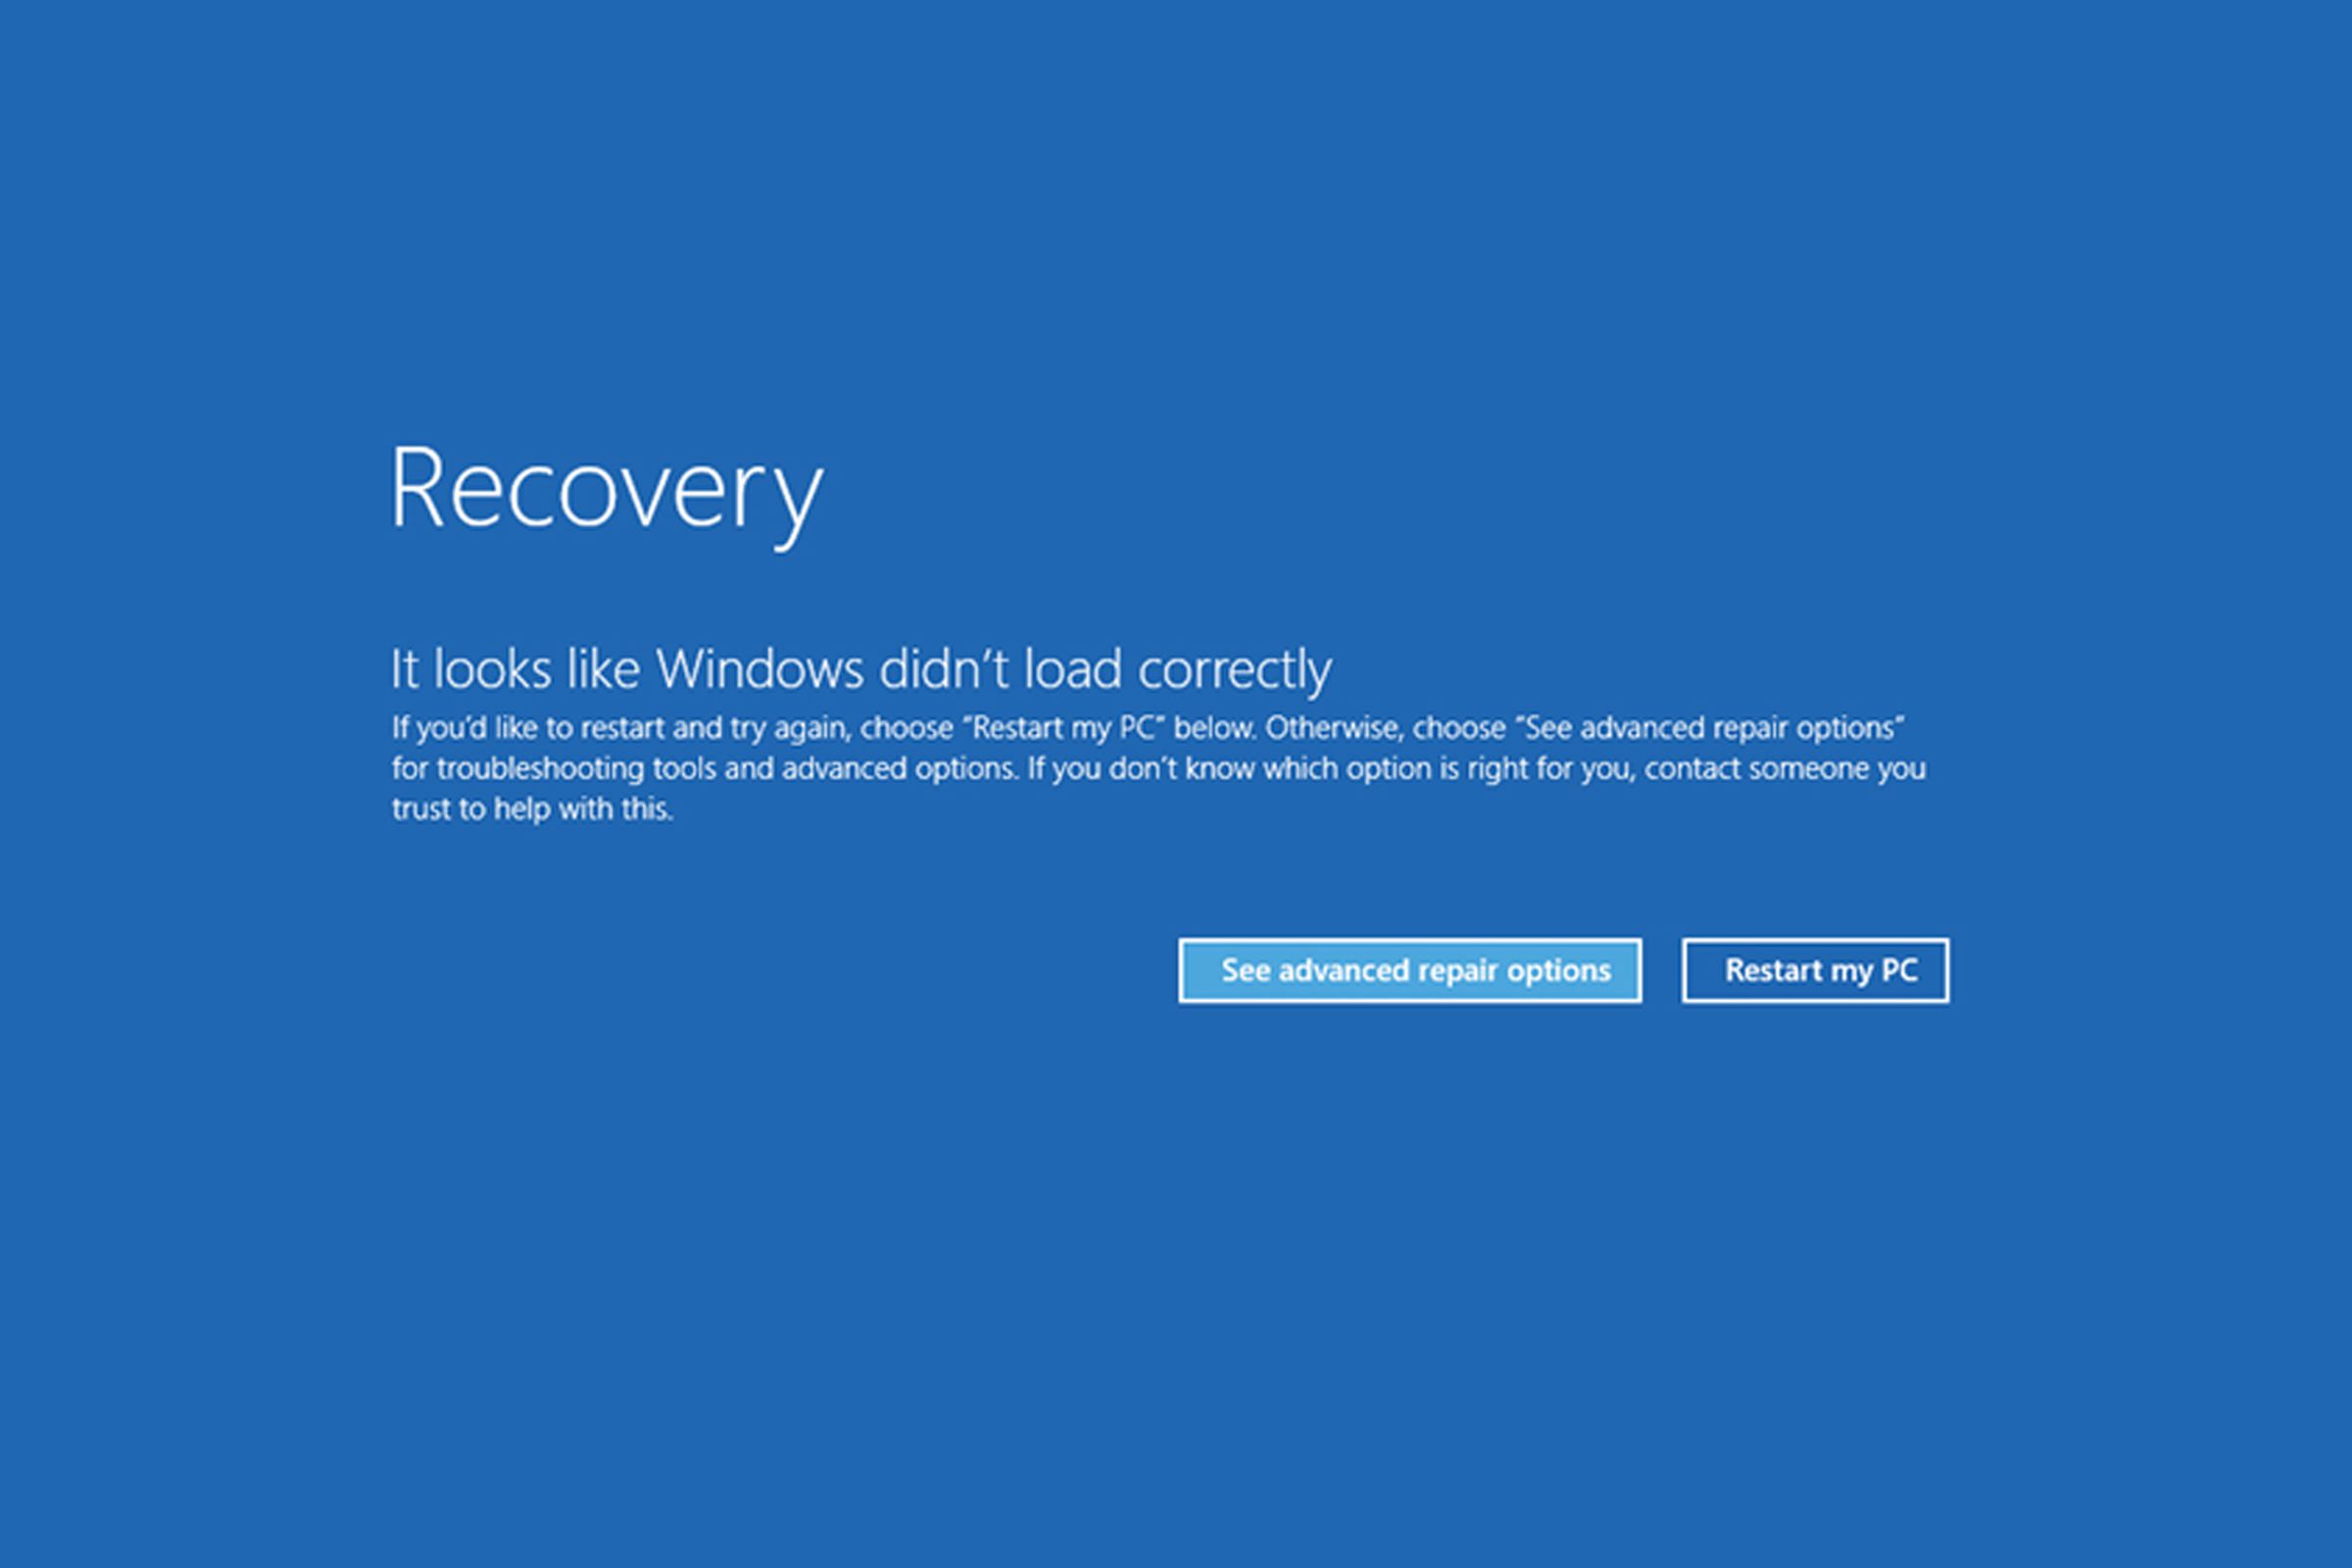 Affected machines are stuck in a recovery blue screen at boot.